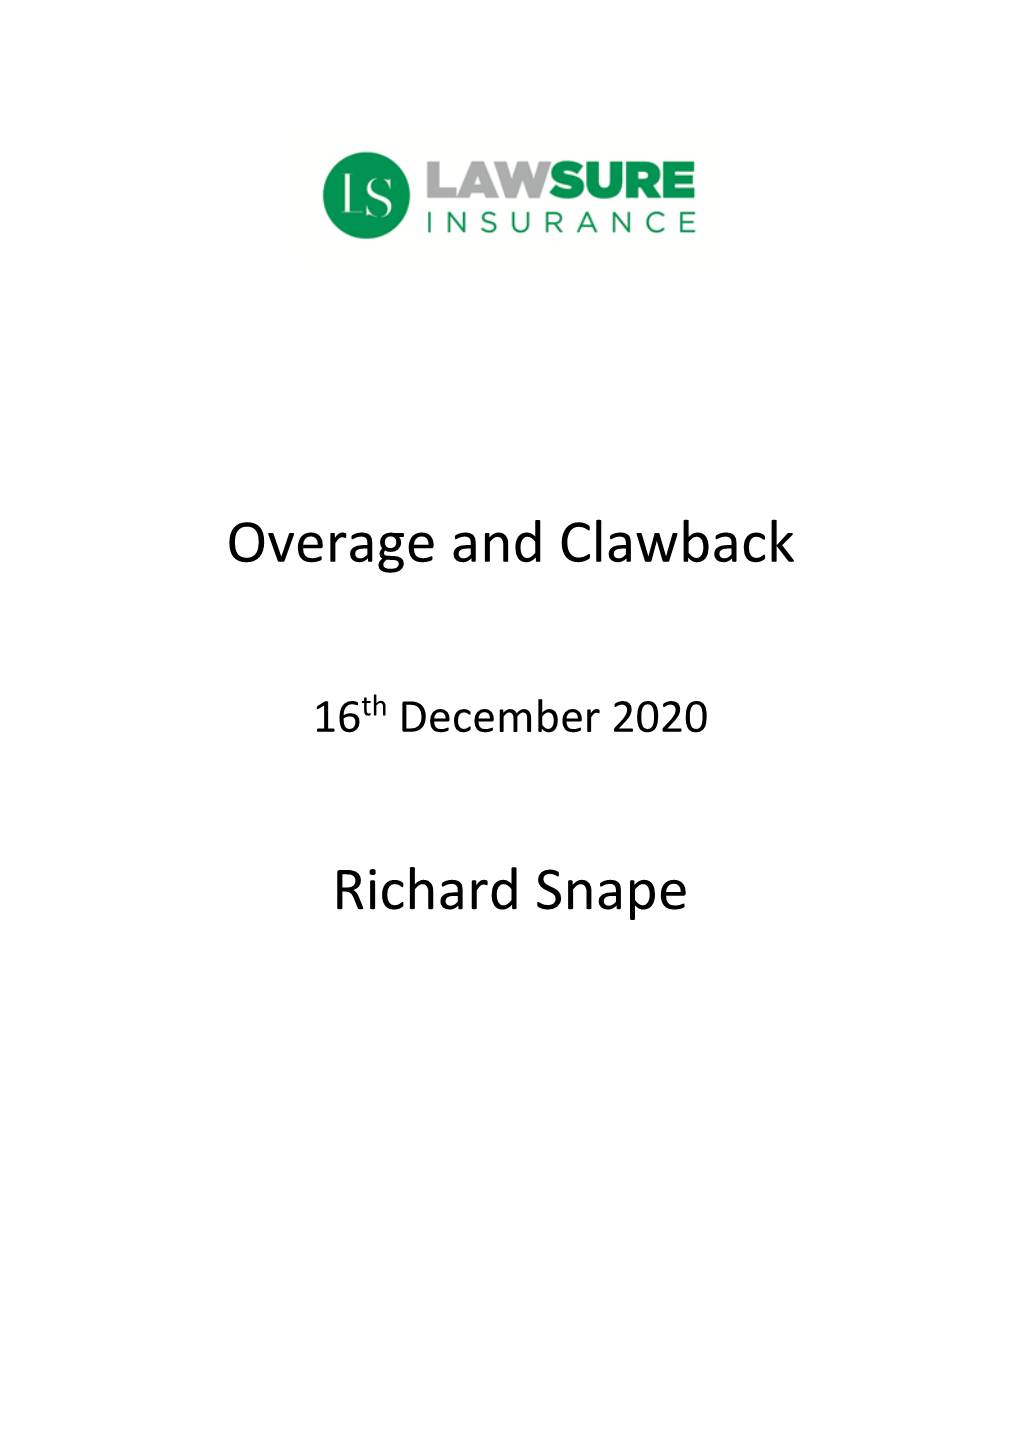 Overage and Clawback Richard Snape